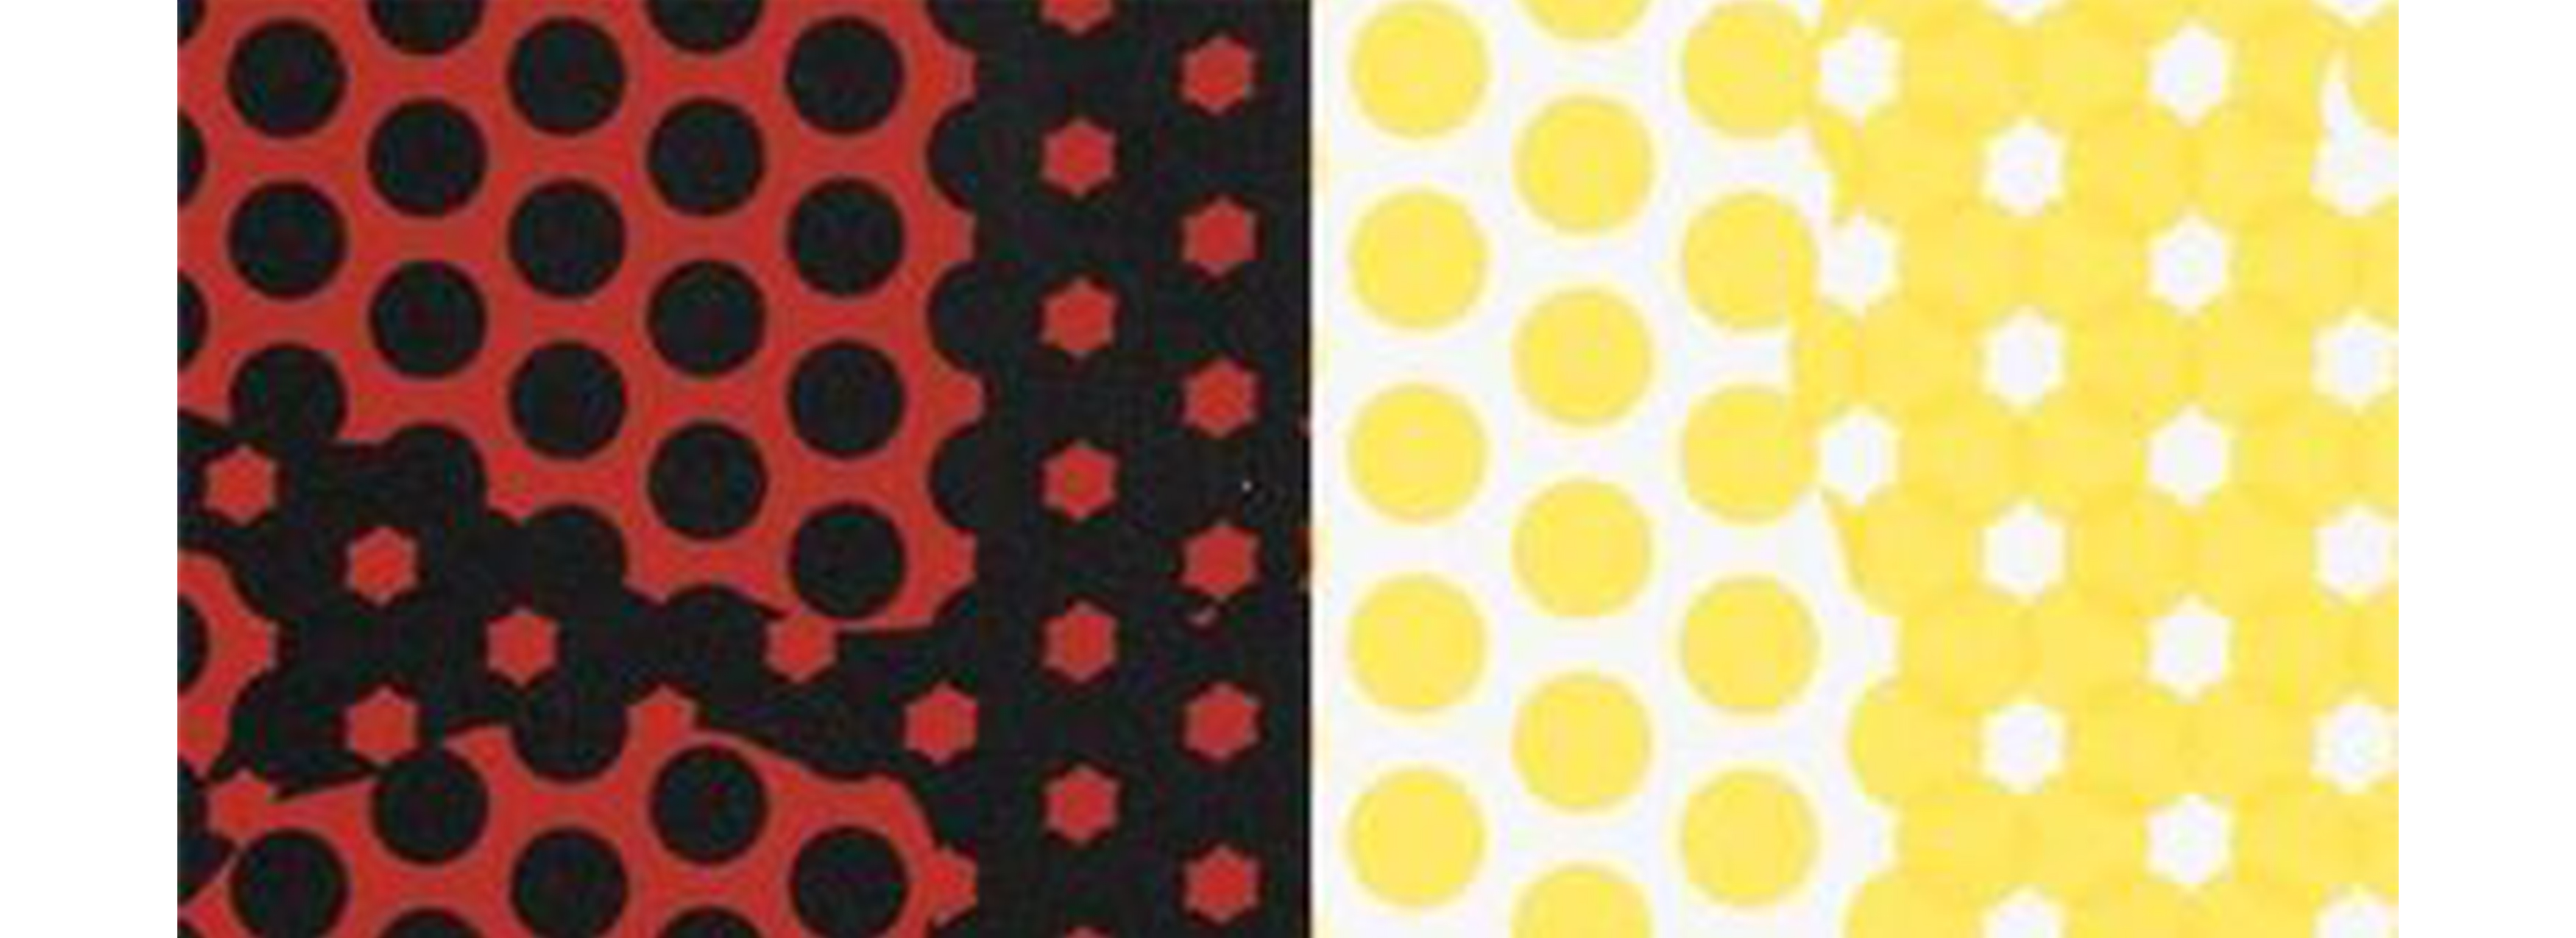 left: red background with black pixelated polka dots. right: image with yellow and white pixelated polka dots